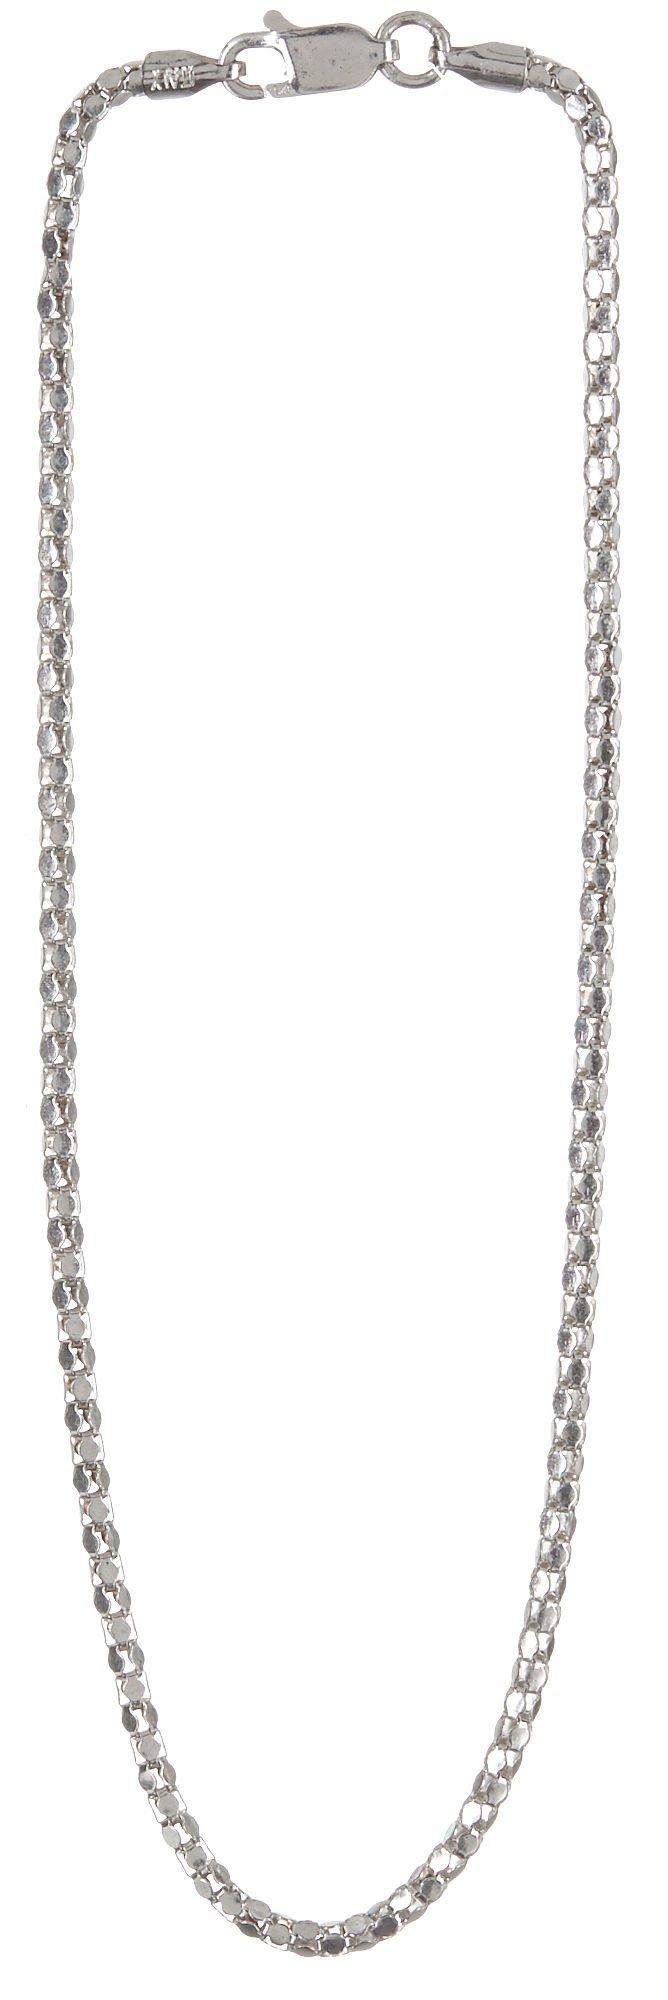 Piper & Taylor 10'' Popcorn Chain Anklet